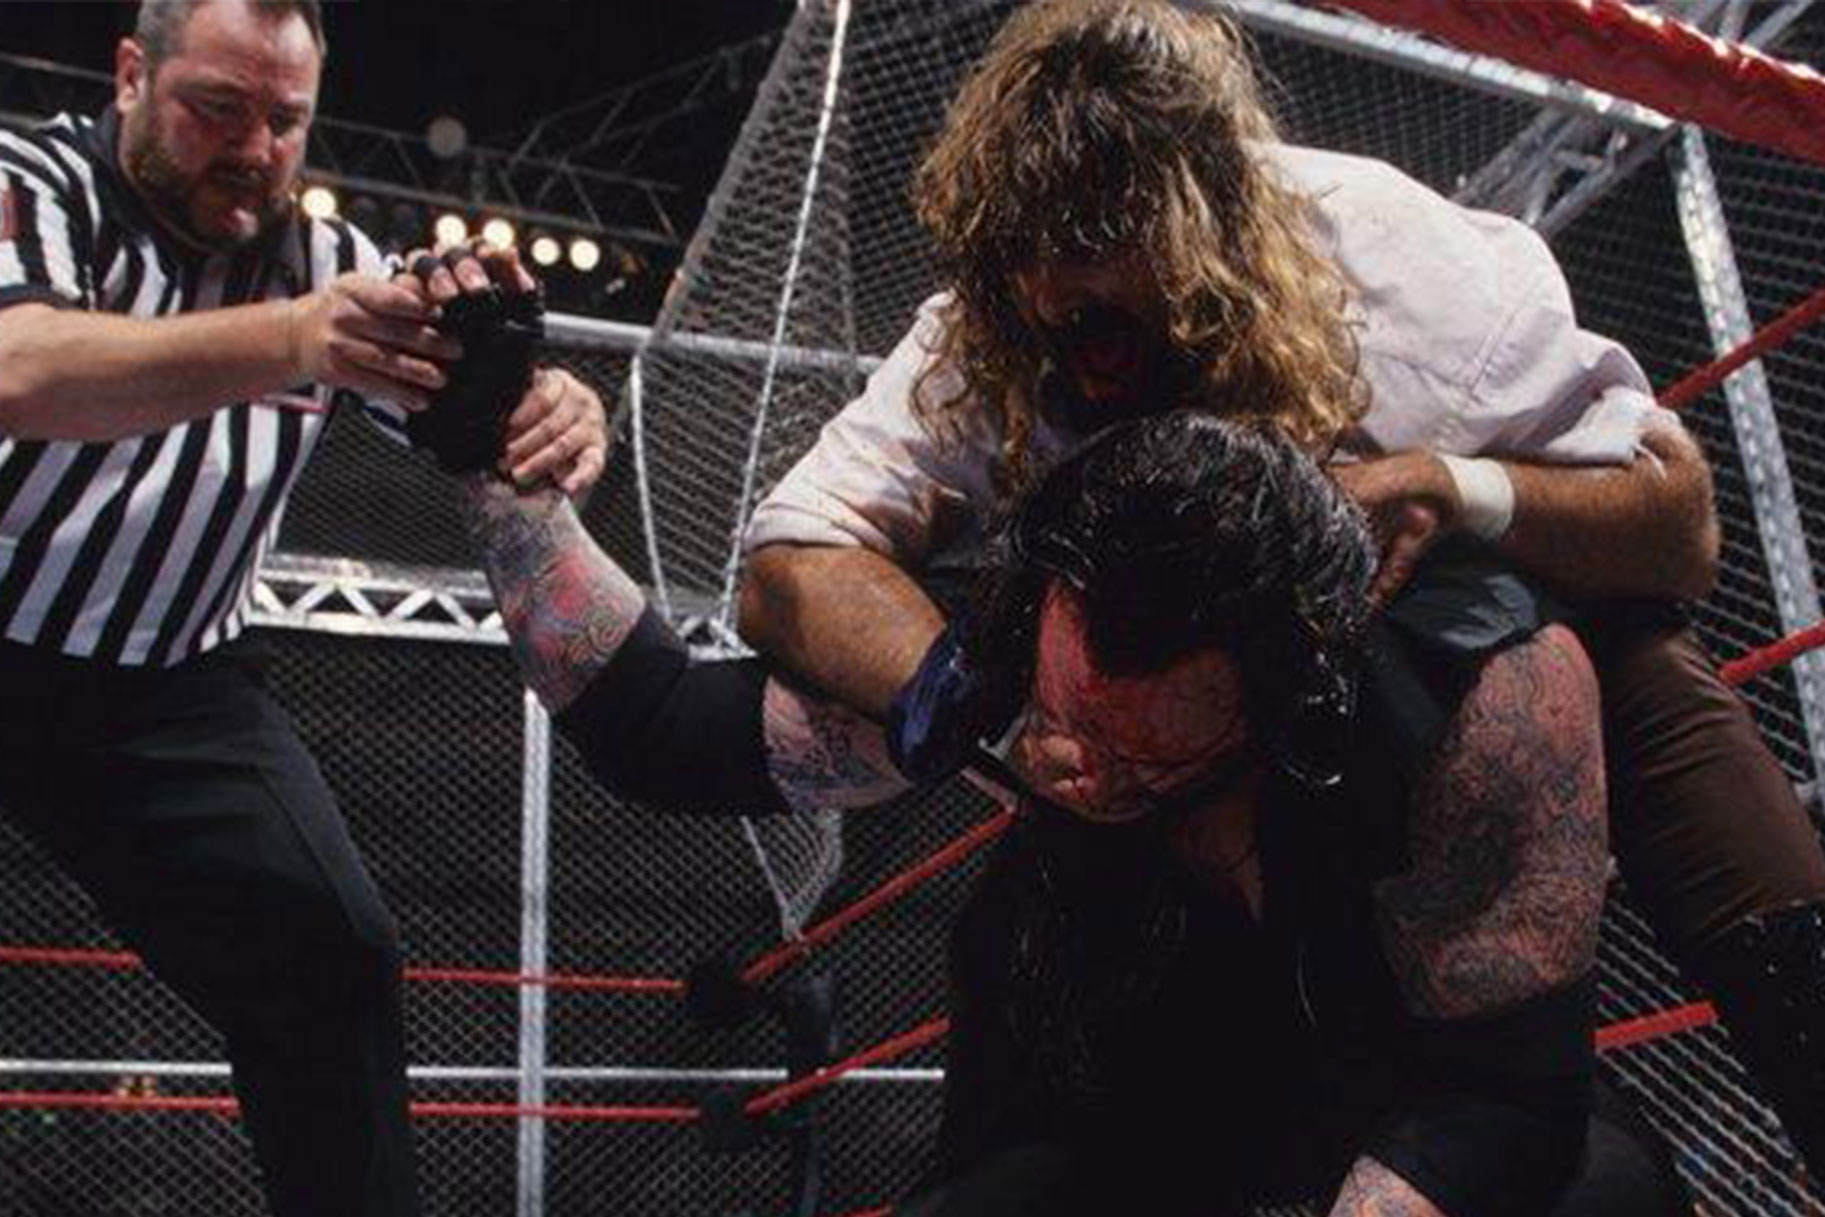 Full match undertaker vs mankind hell in a cell